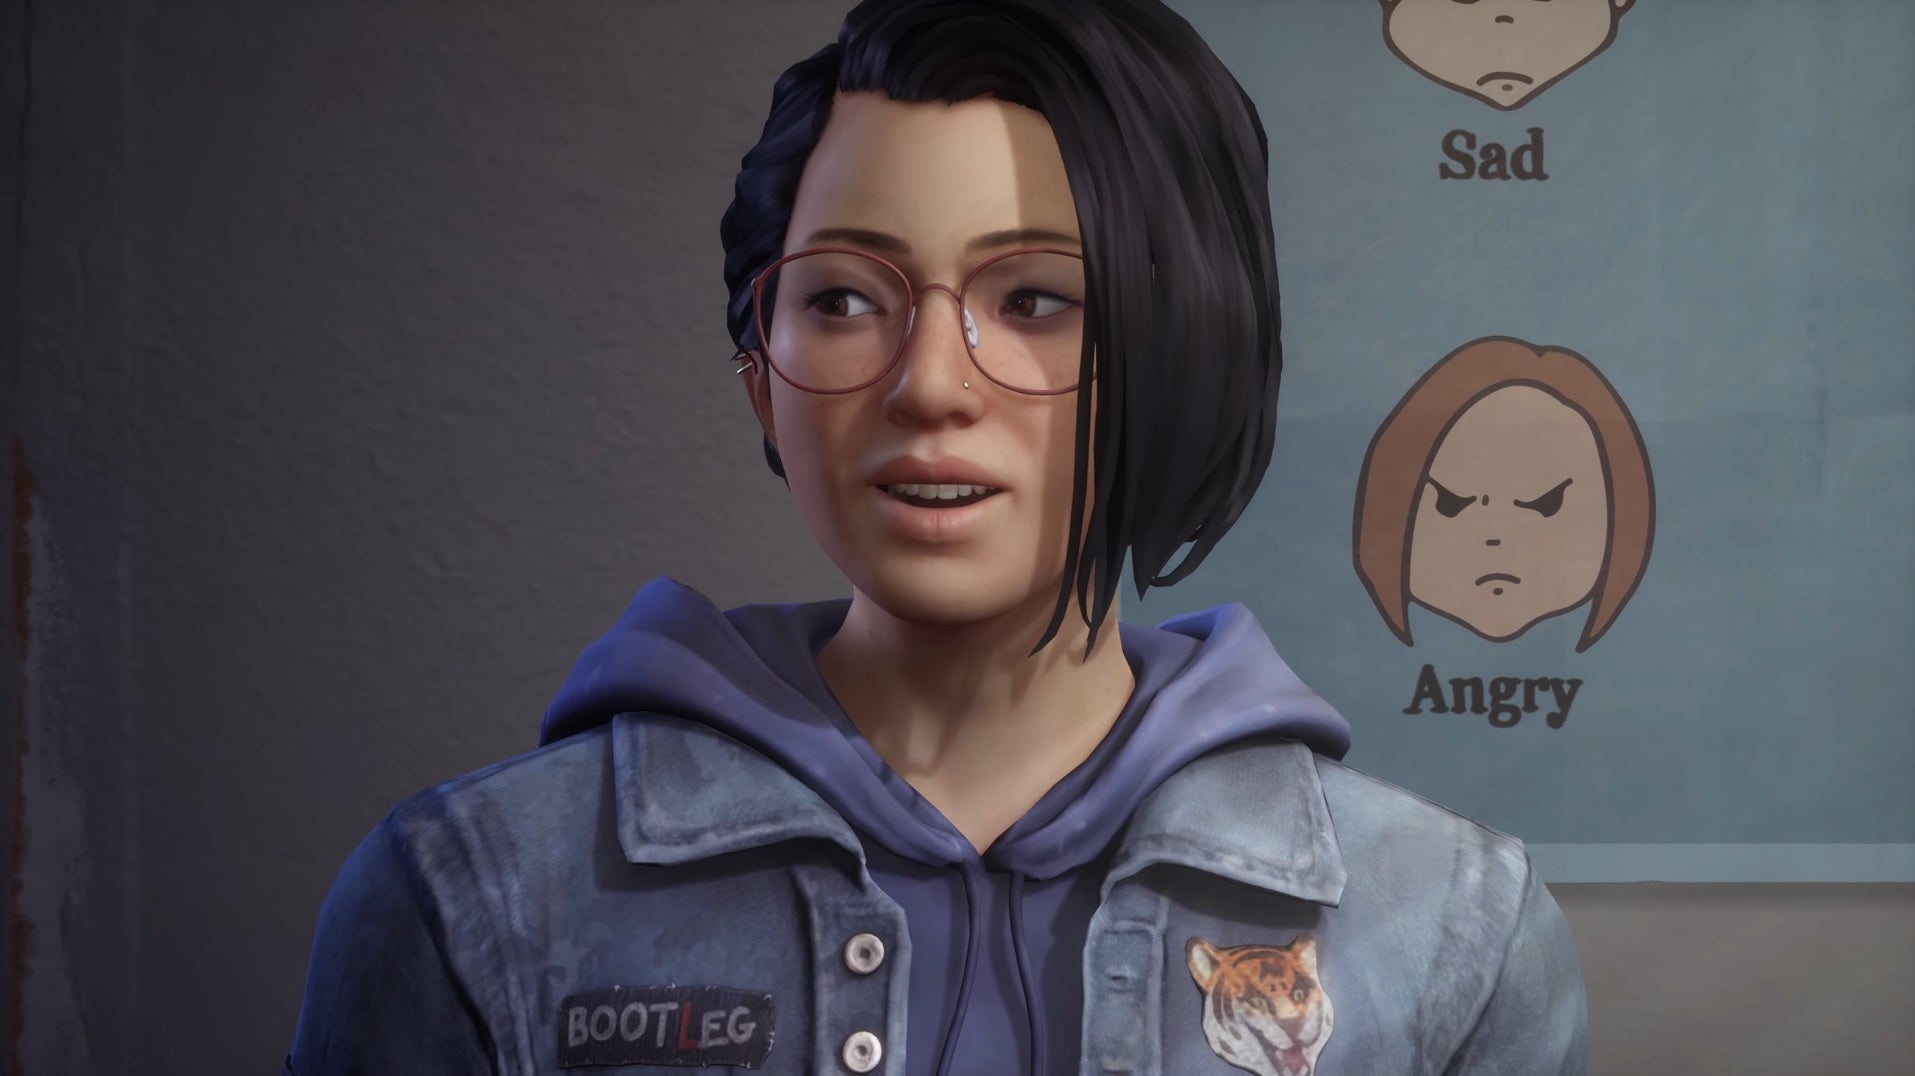 Life Is Strange: True Colors - Main character Alex Chen sits, talking, in front of a poster with drawn faces labeled "Sad" and "Angry"